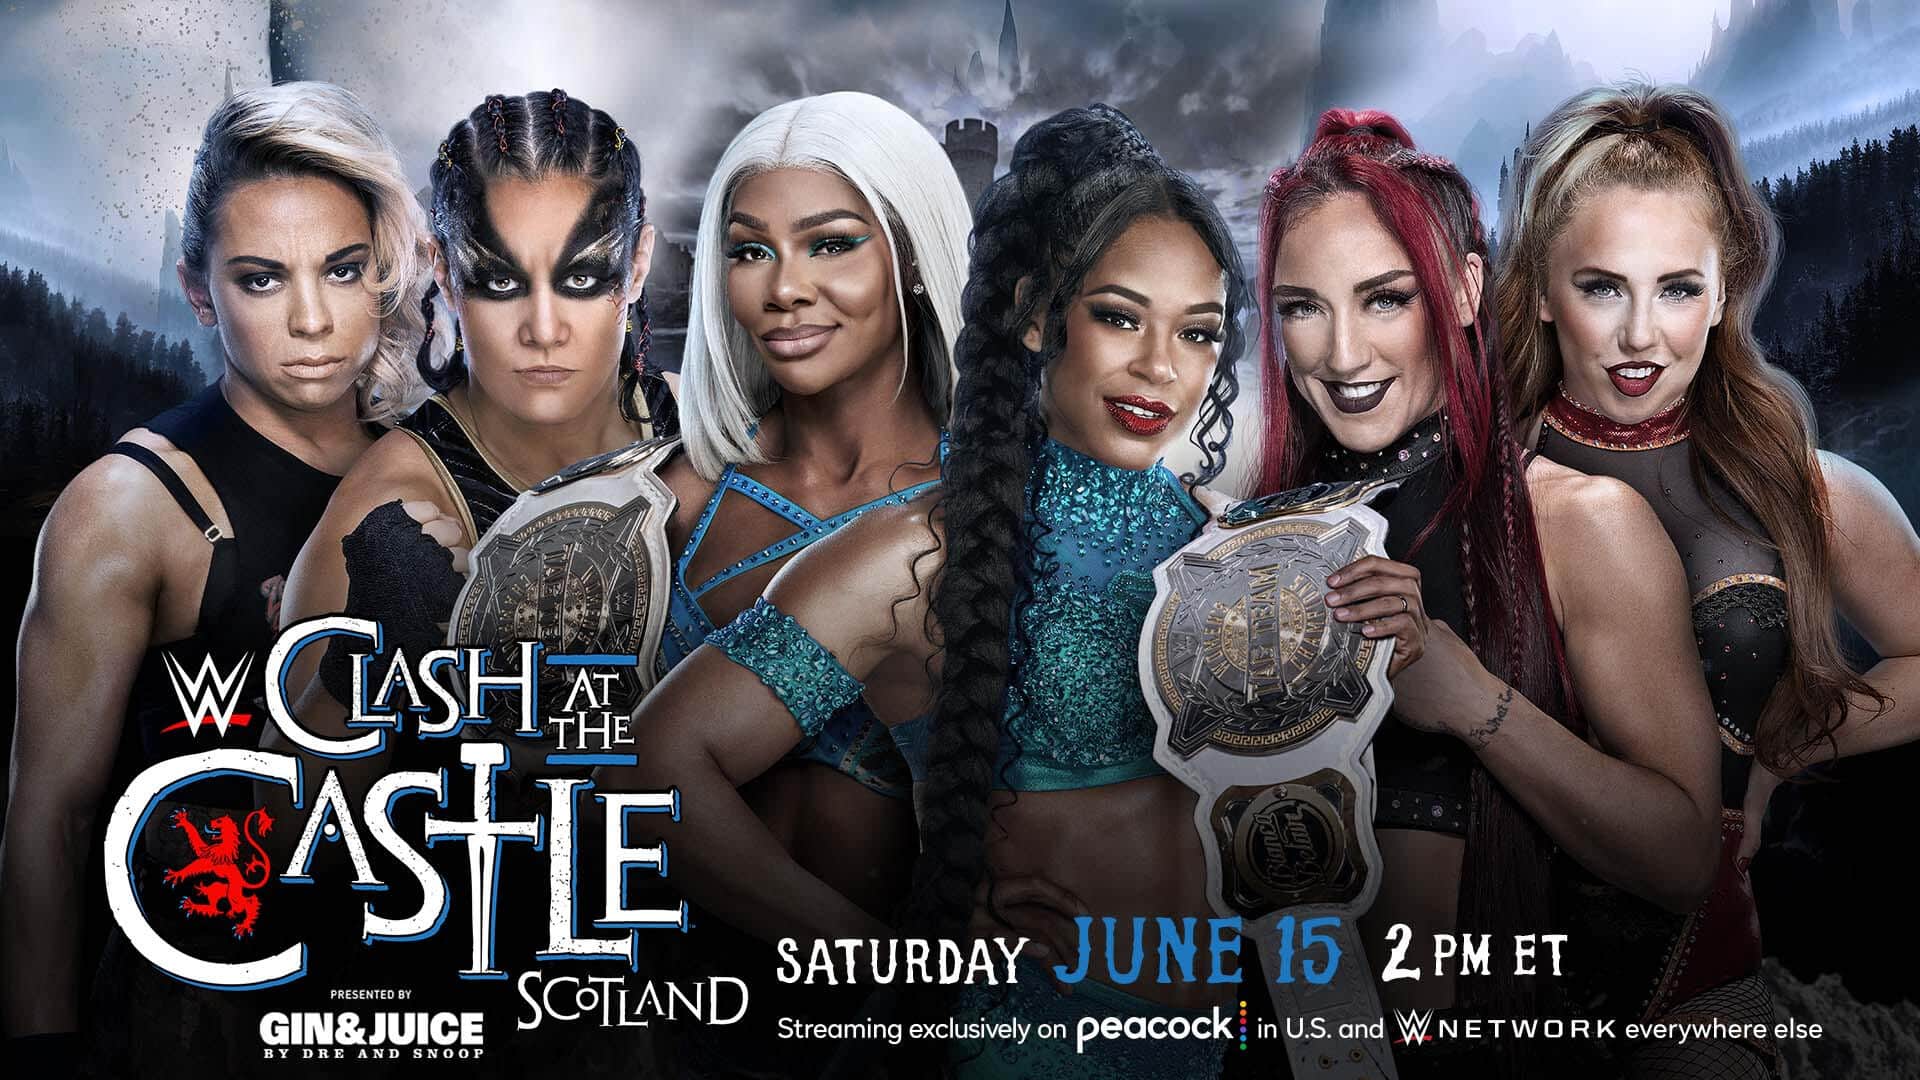 The Women’s Tag Team Championship in WWE changes ownership at the ‘Clash at the Castle’ event in Scotland.